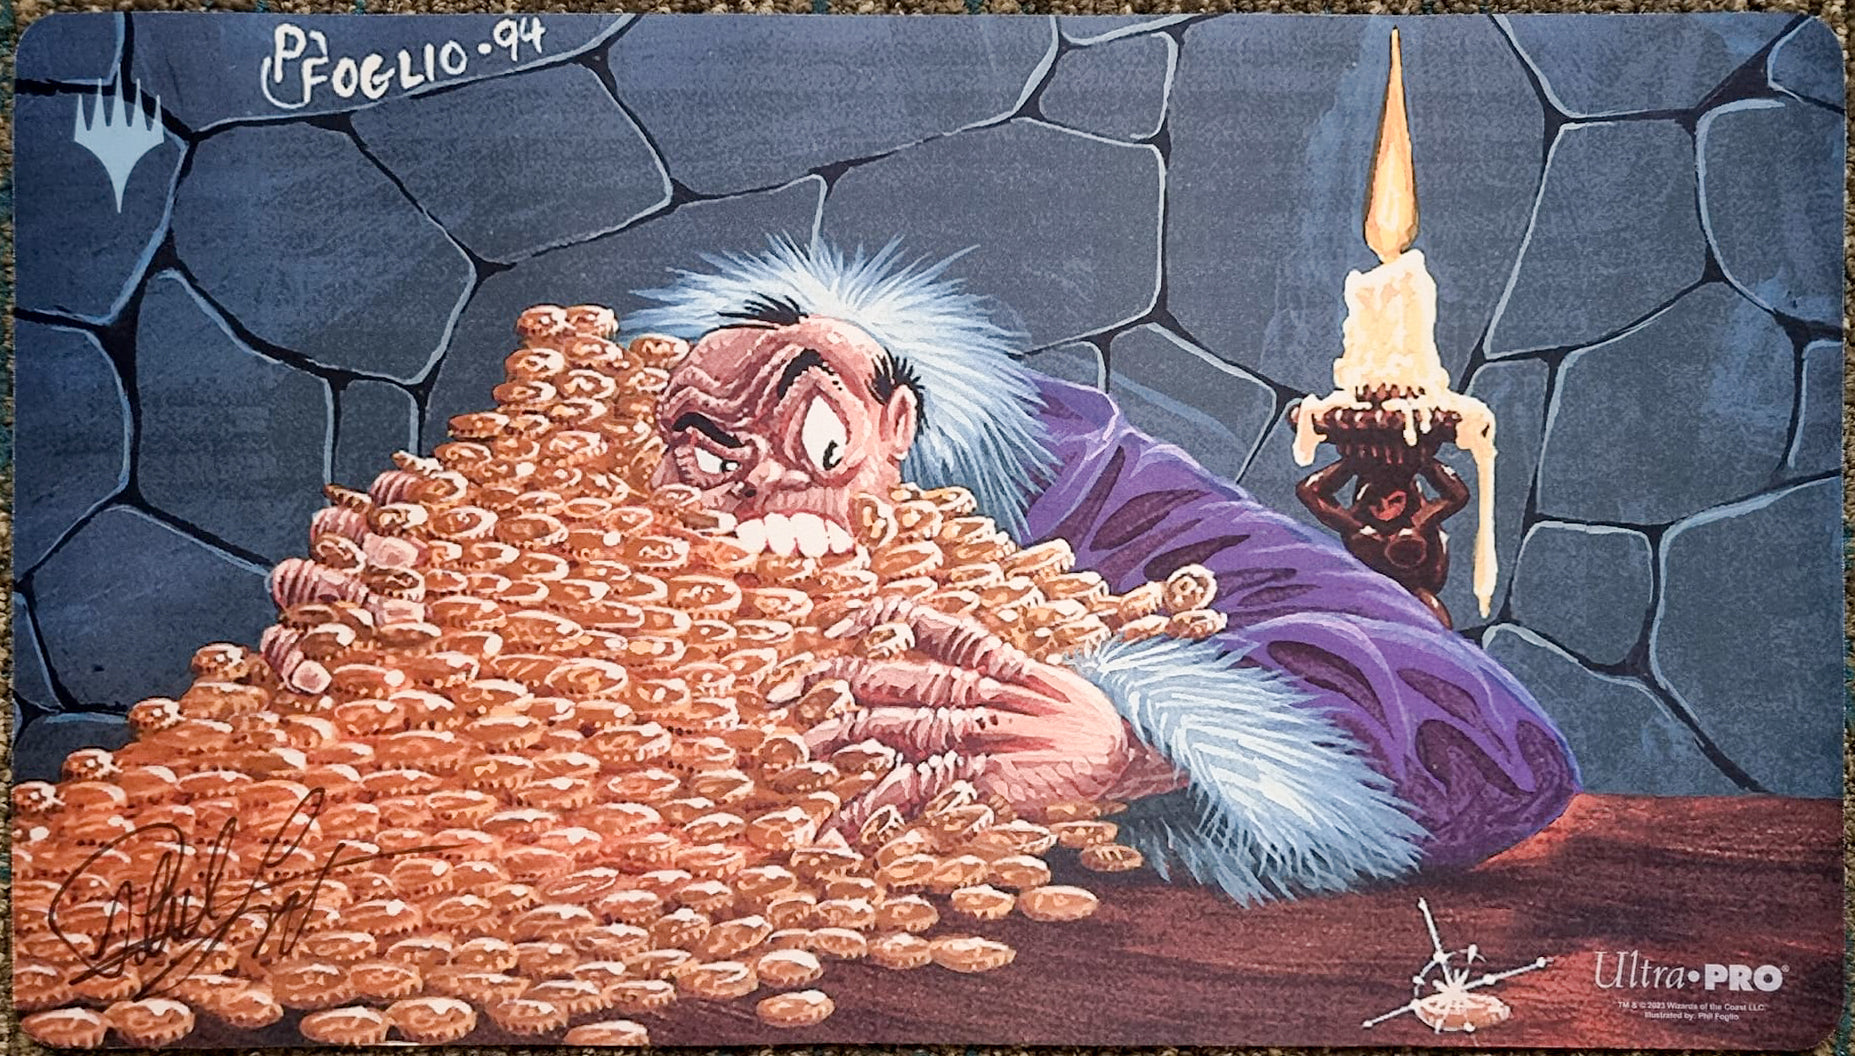 Greed - Phil Foglio - Signed by the Artist - MTG Playmat